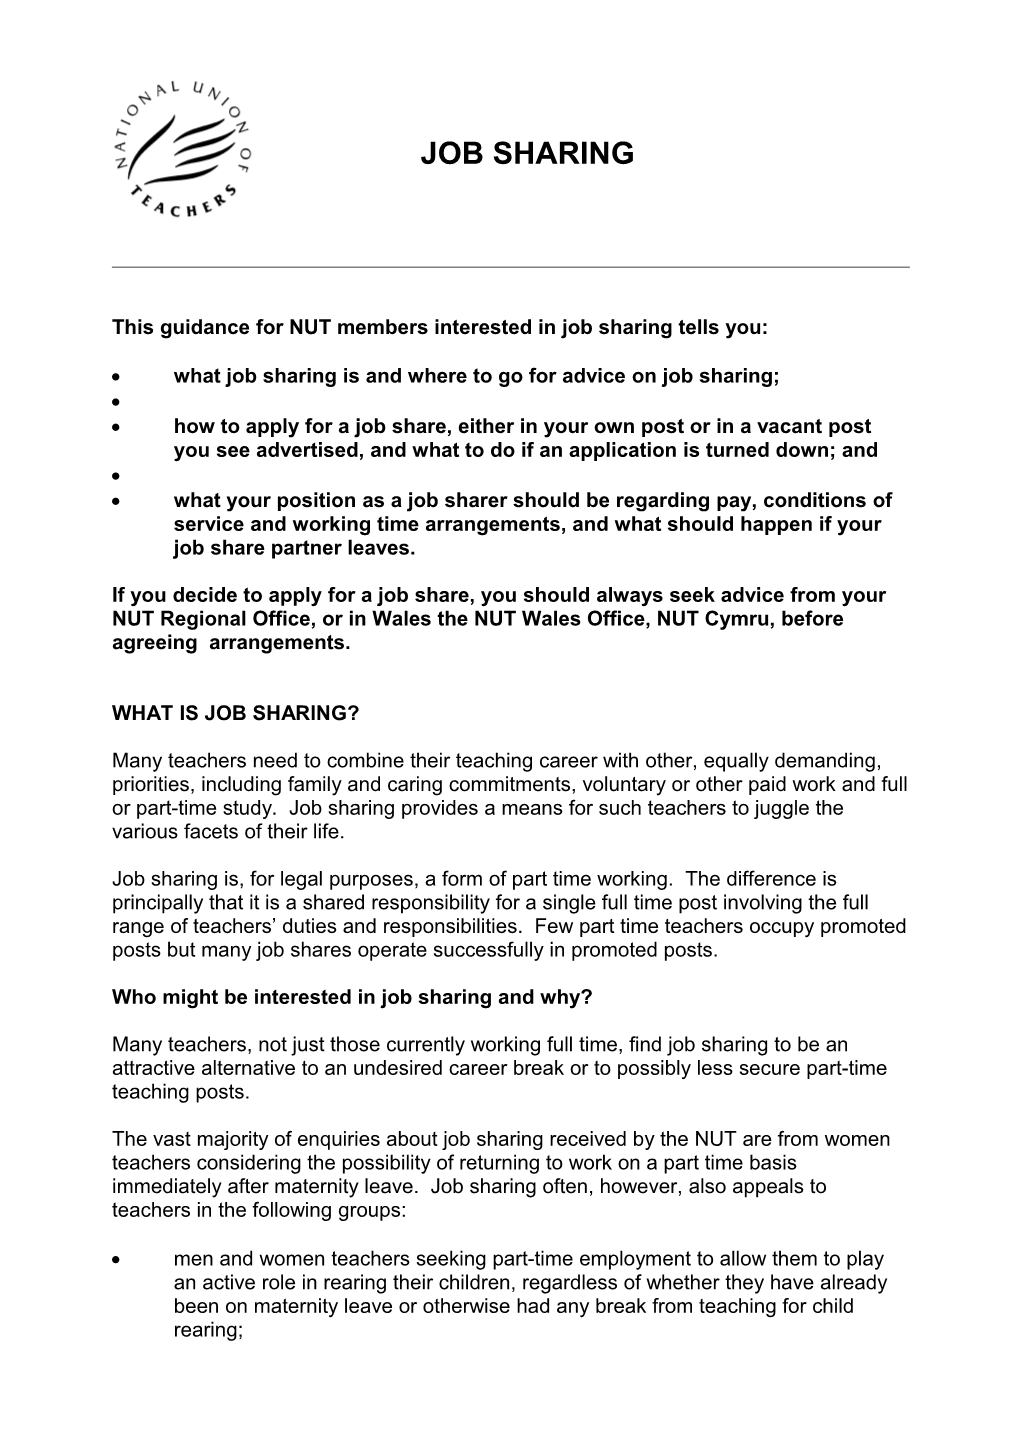 This Guidance for NUT Members Interested in Job Sharing Tells You